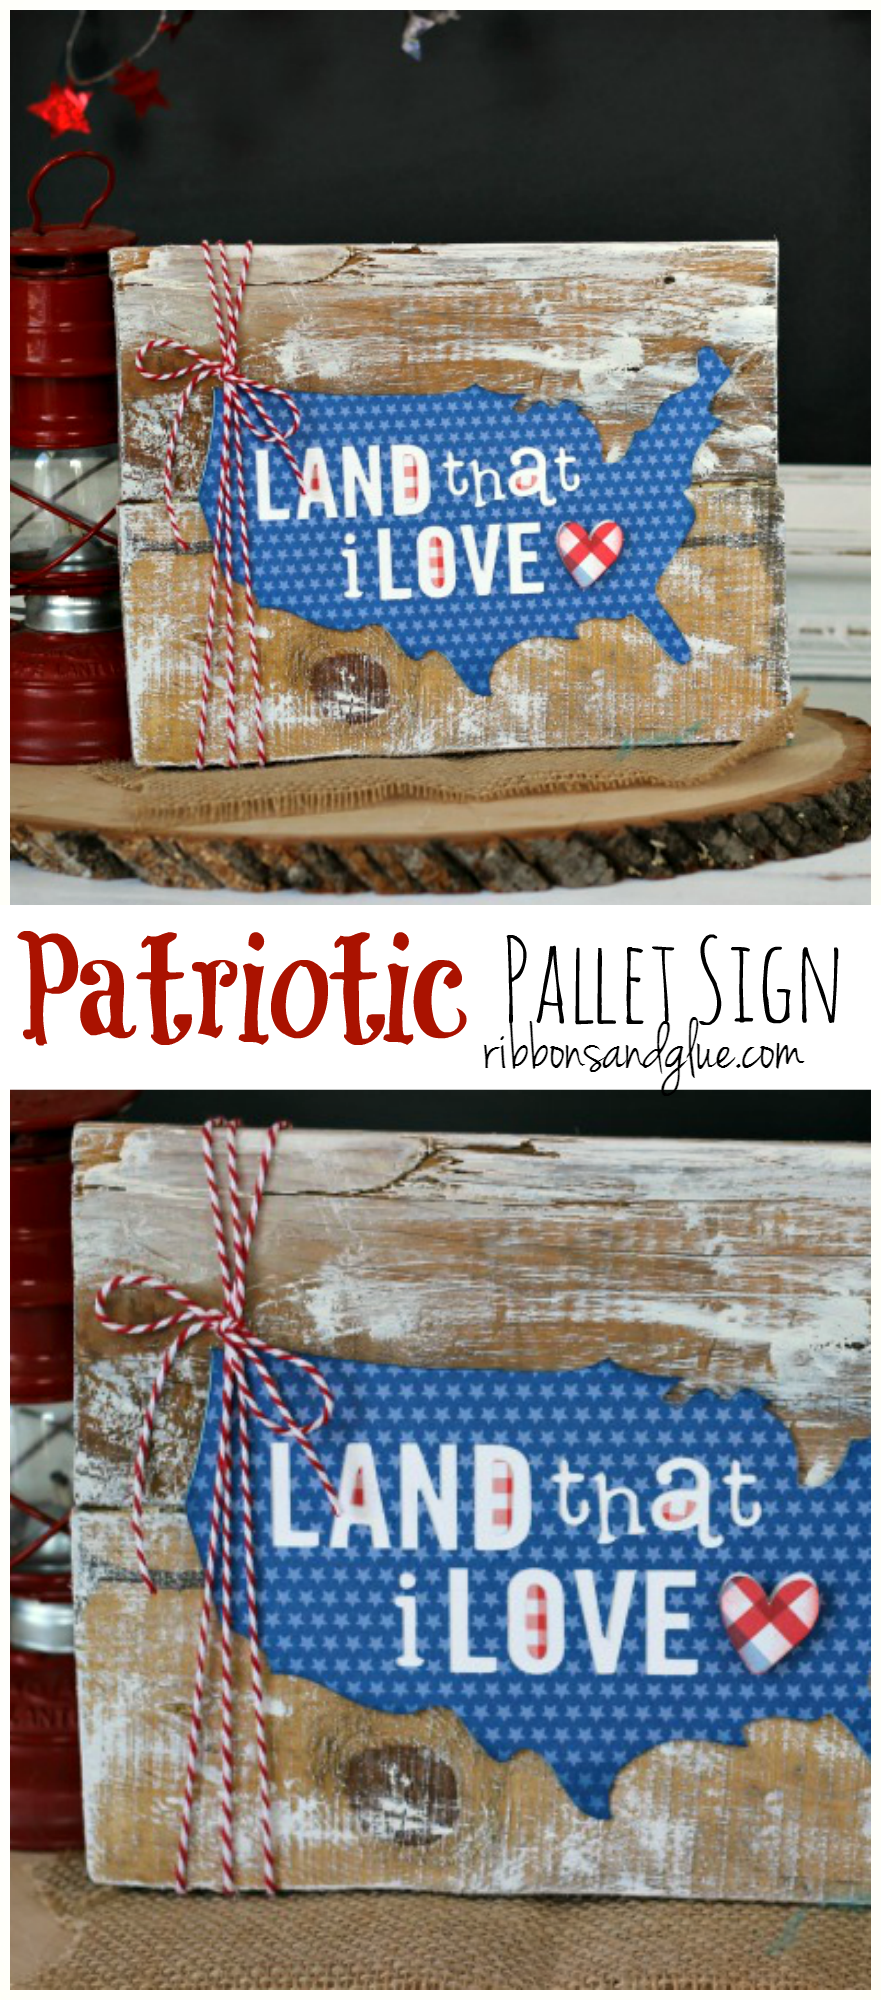 How to make a Patriotic Pallet Sign from scrap pallet wood and Patriotic paper cut with Silhouette CAMEO. Easy, rustic pallet sign project for Summer. 